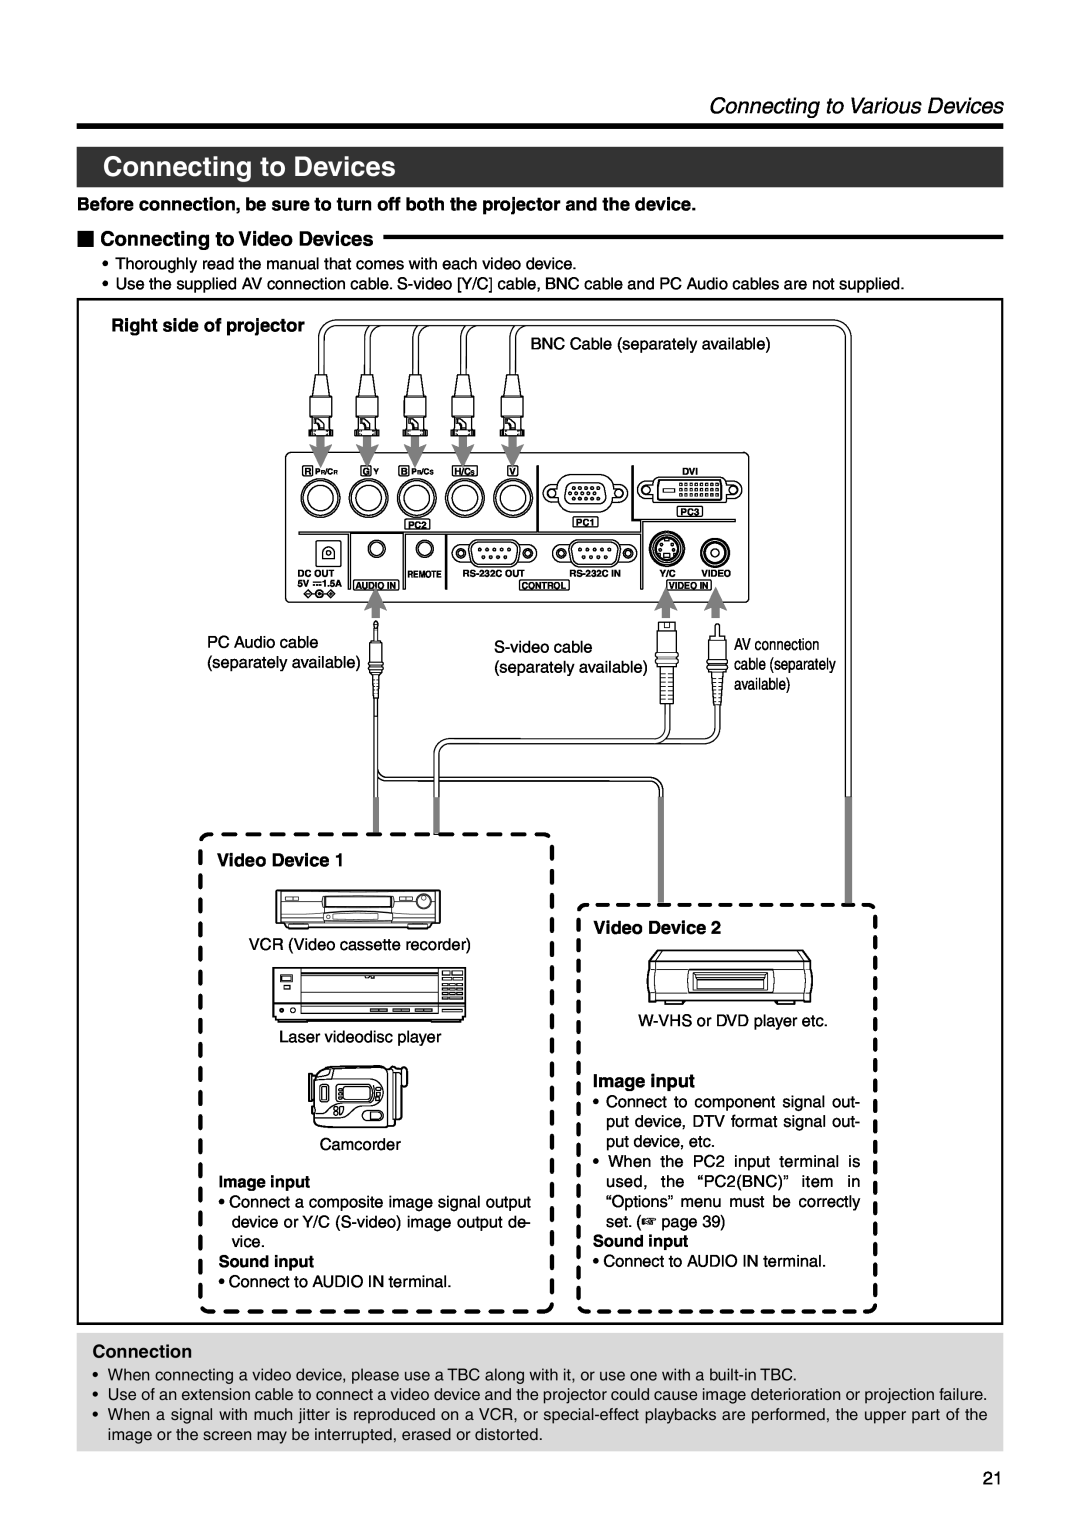 Dukane 28A9017 user manual Connecting to Devices, Connecting to Various Devices,  Connecting to Video Devices, Image input 